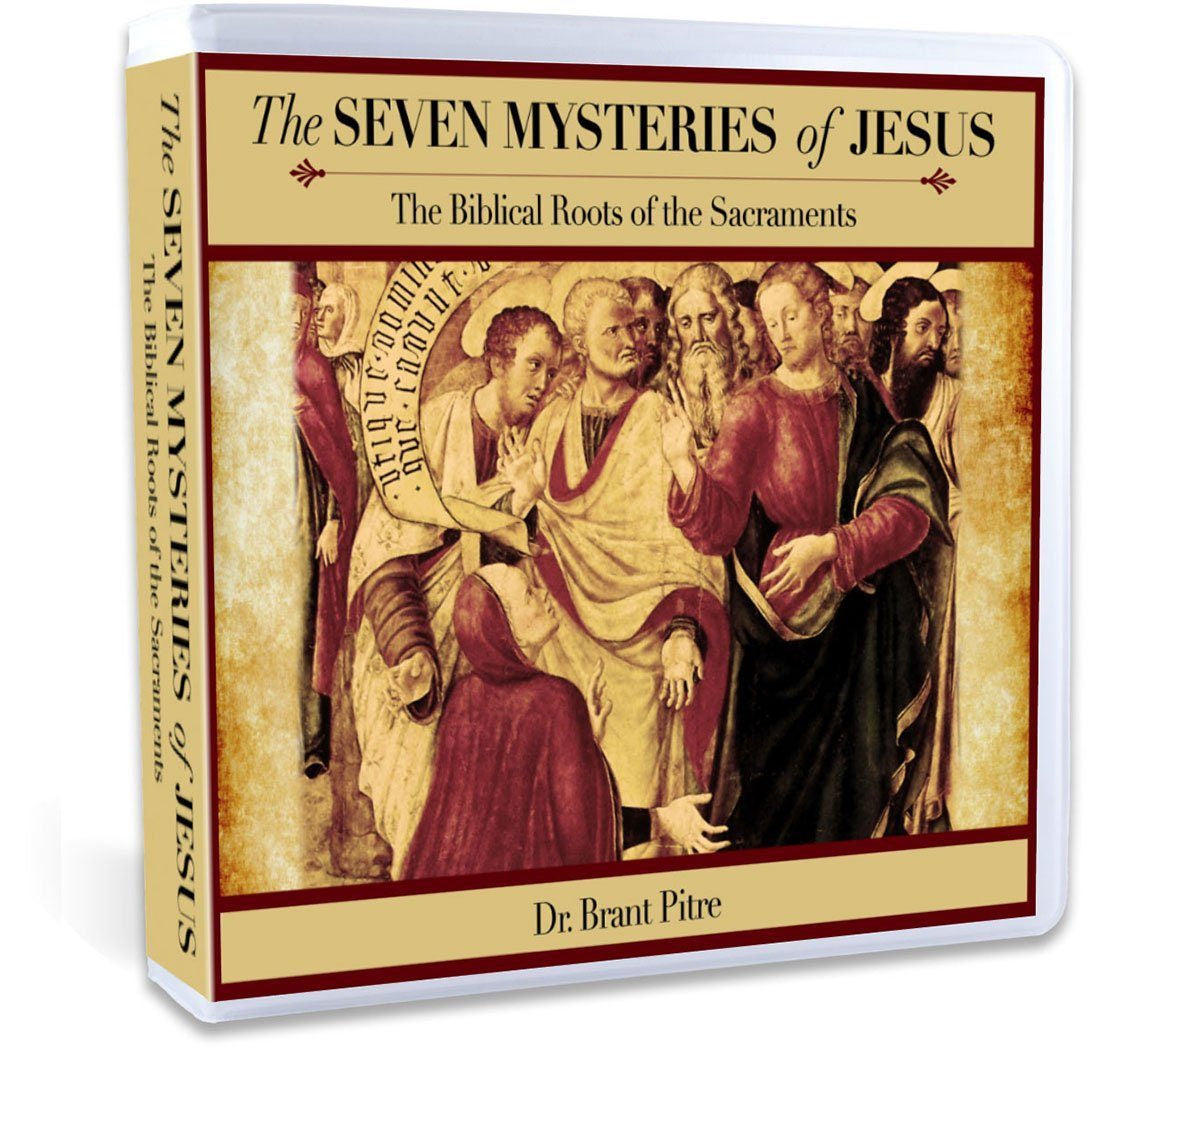 Dr. Brant Pitre gives you an invigorating and complete Bible study on the seven sacraments in the Bible: Baptism, Eucharist, Confession, Confirmation, Anointing of the Sick, Holy Matrimony, Holy Orders [Priesthood] (CD).